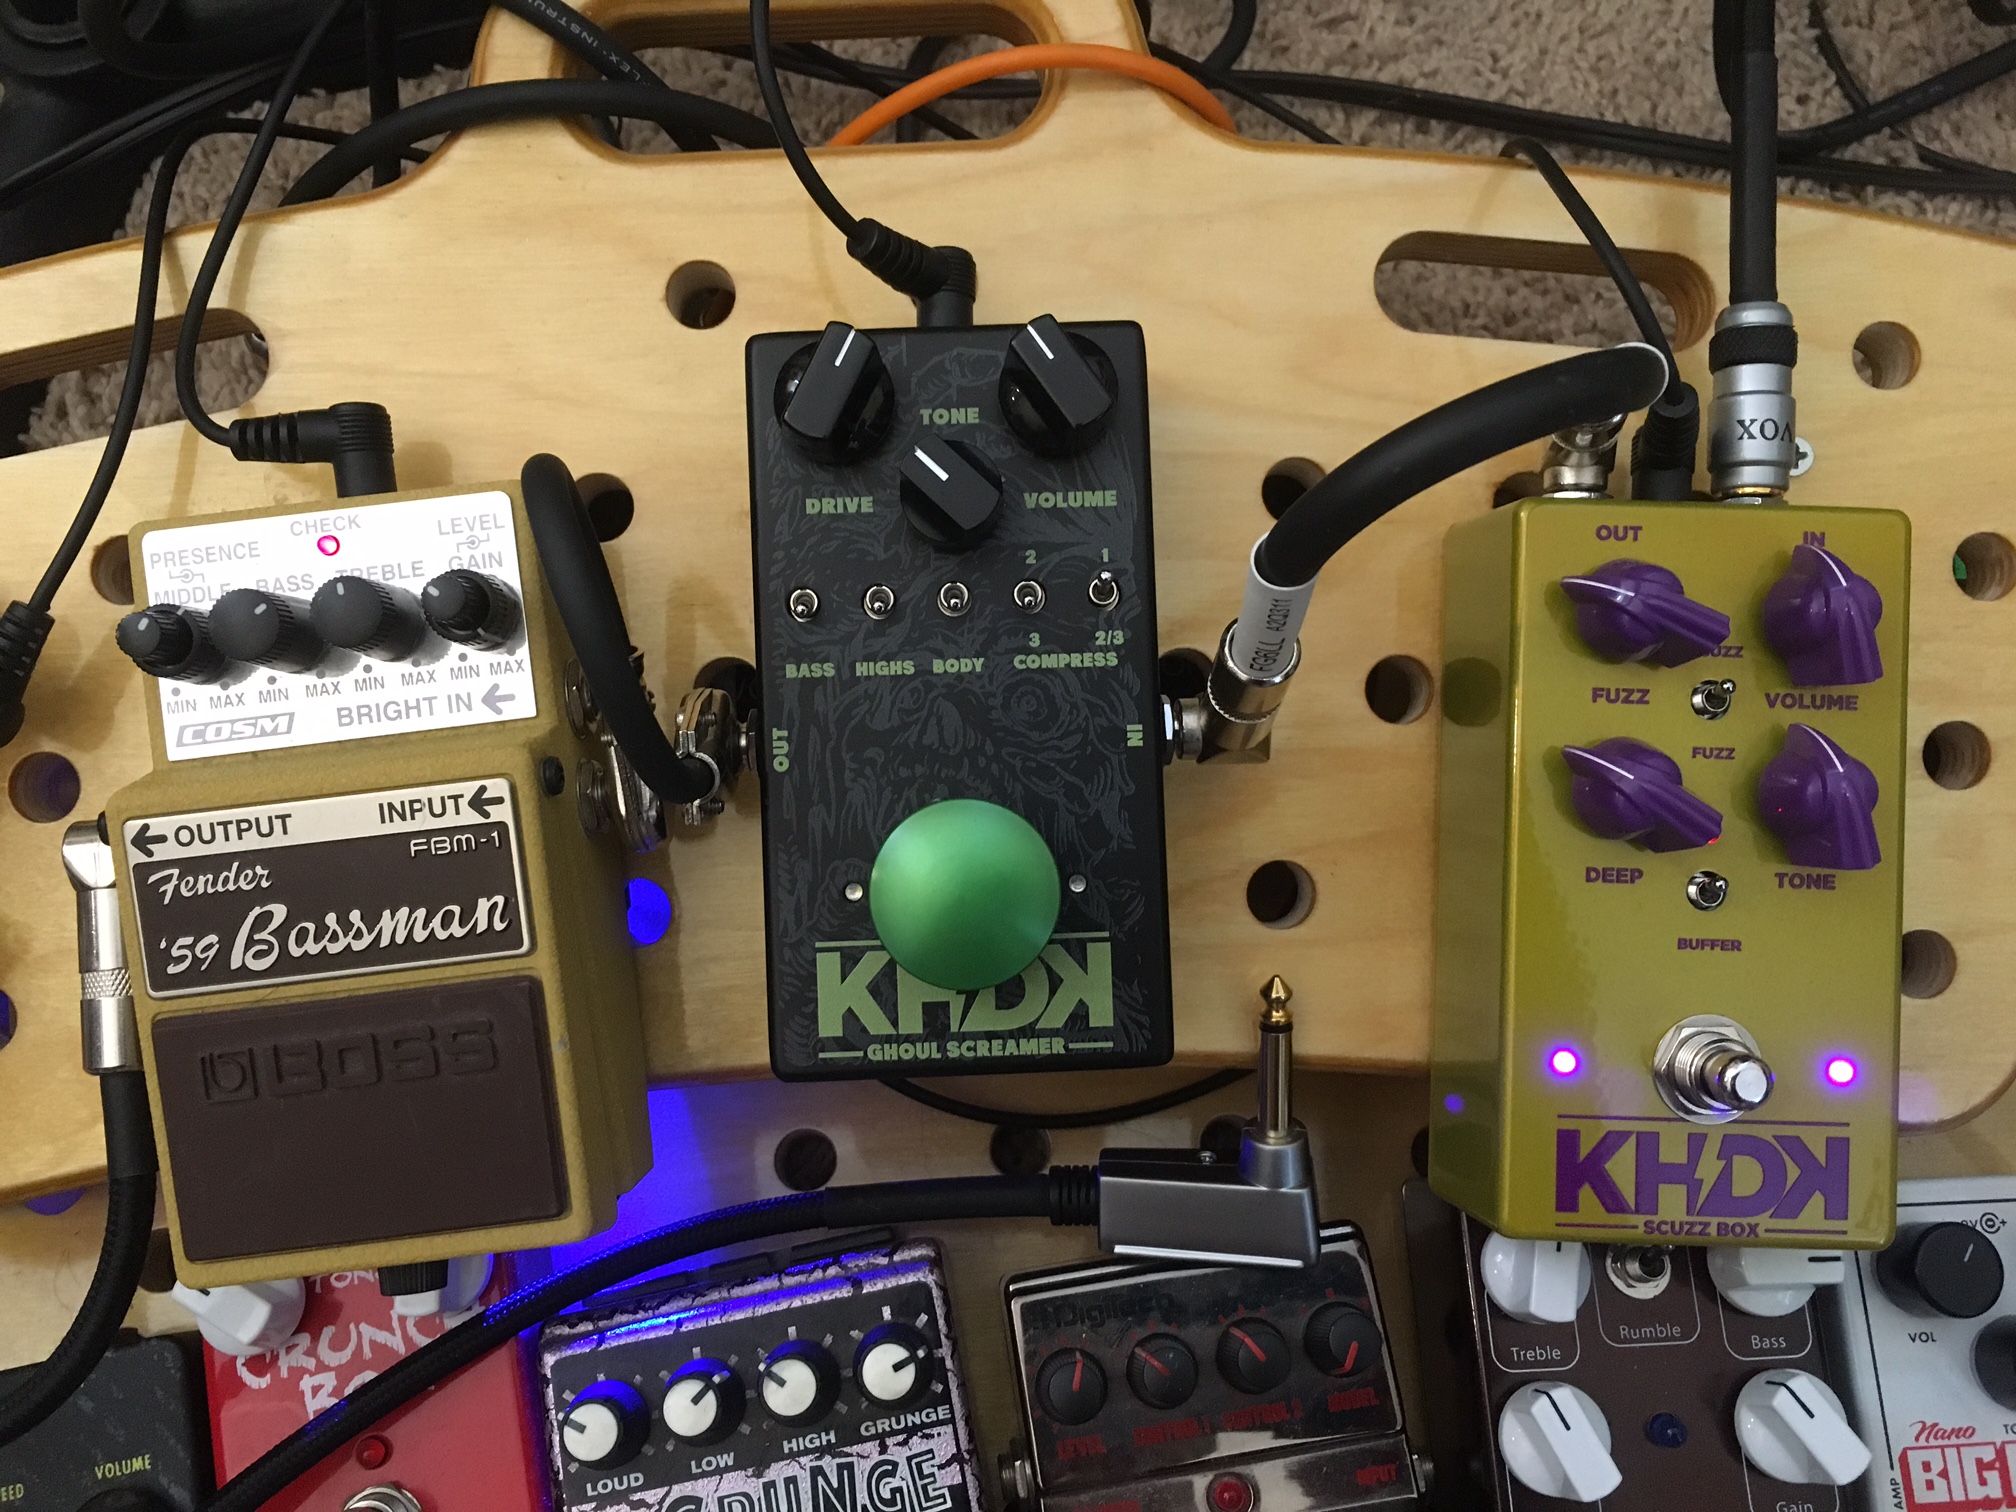 Episode 41: Hands on with the KHDK Scuzz Box